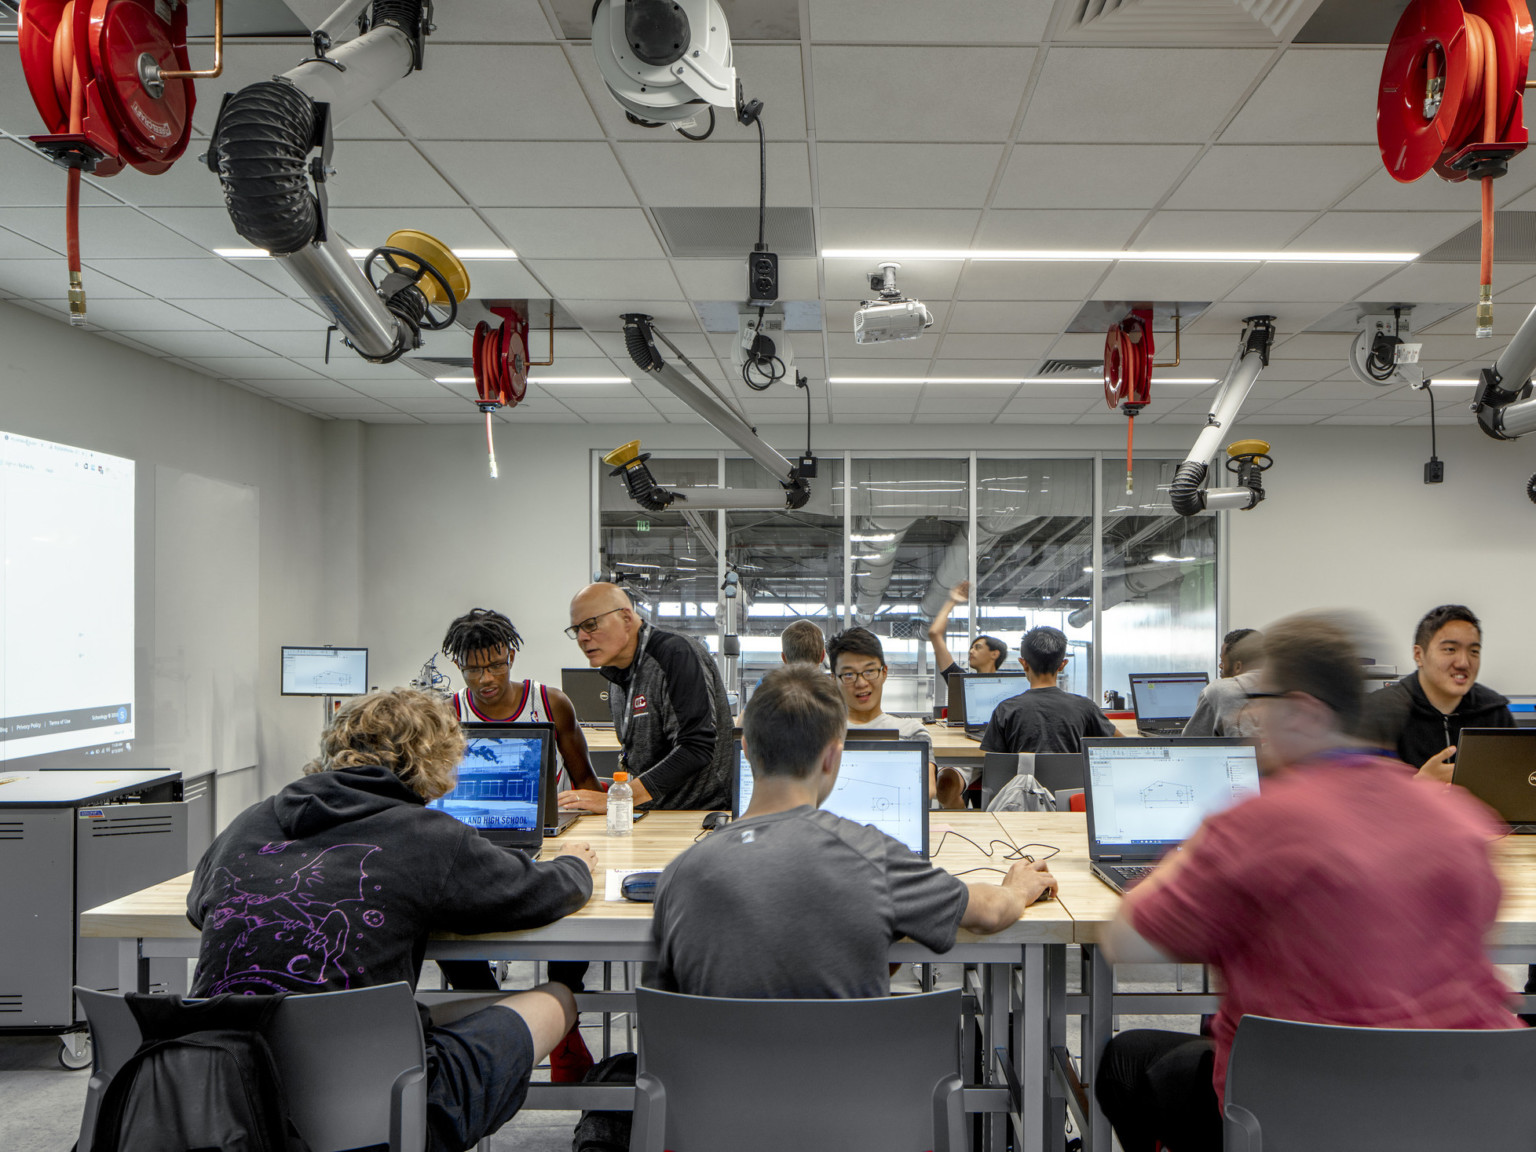 Classroom with students on computers at rows of wood tables. Equipment and power cords hang from the ceiling of white room